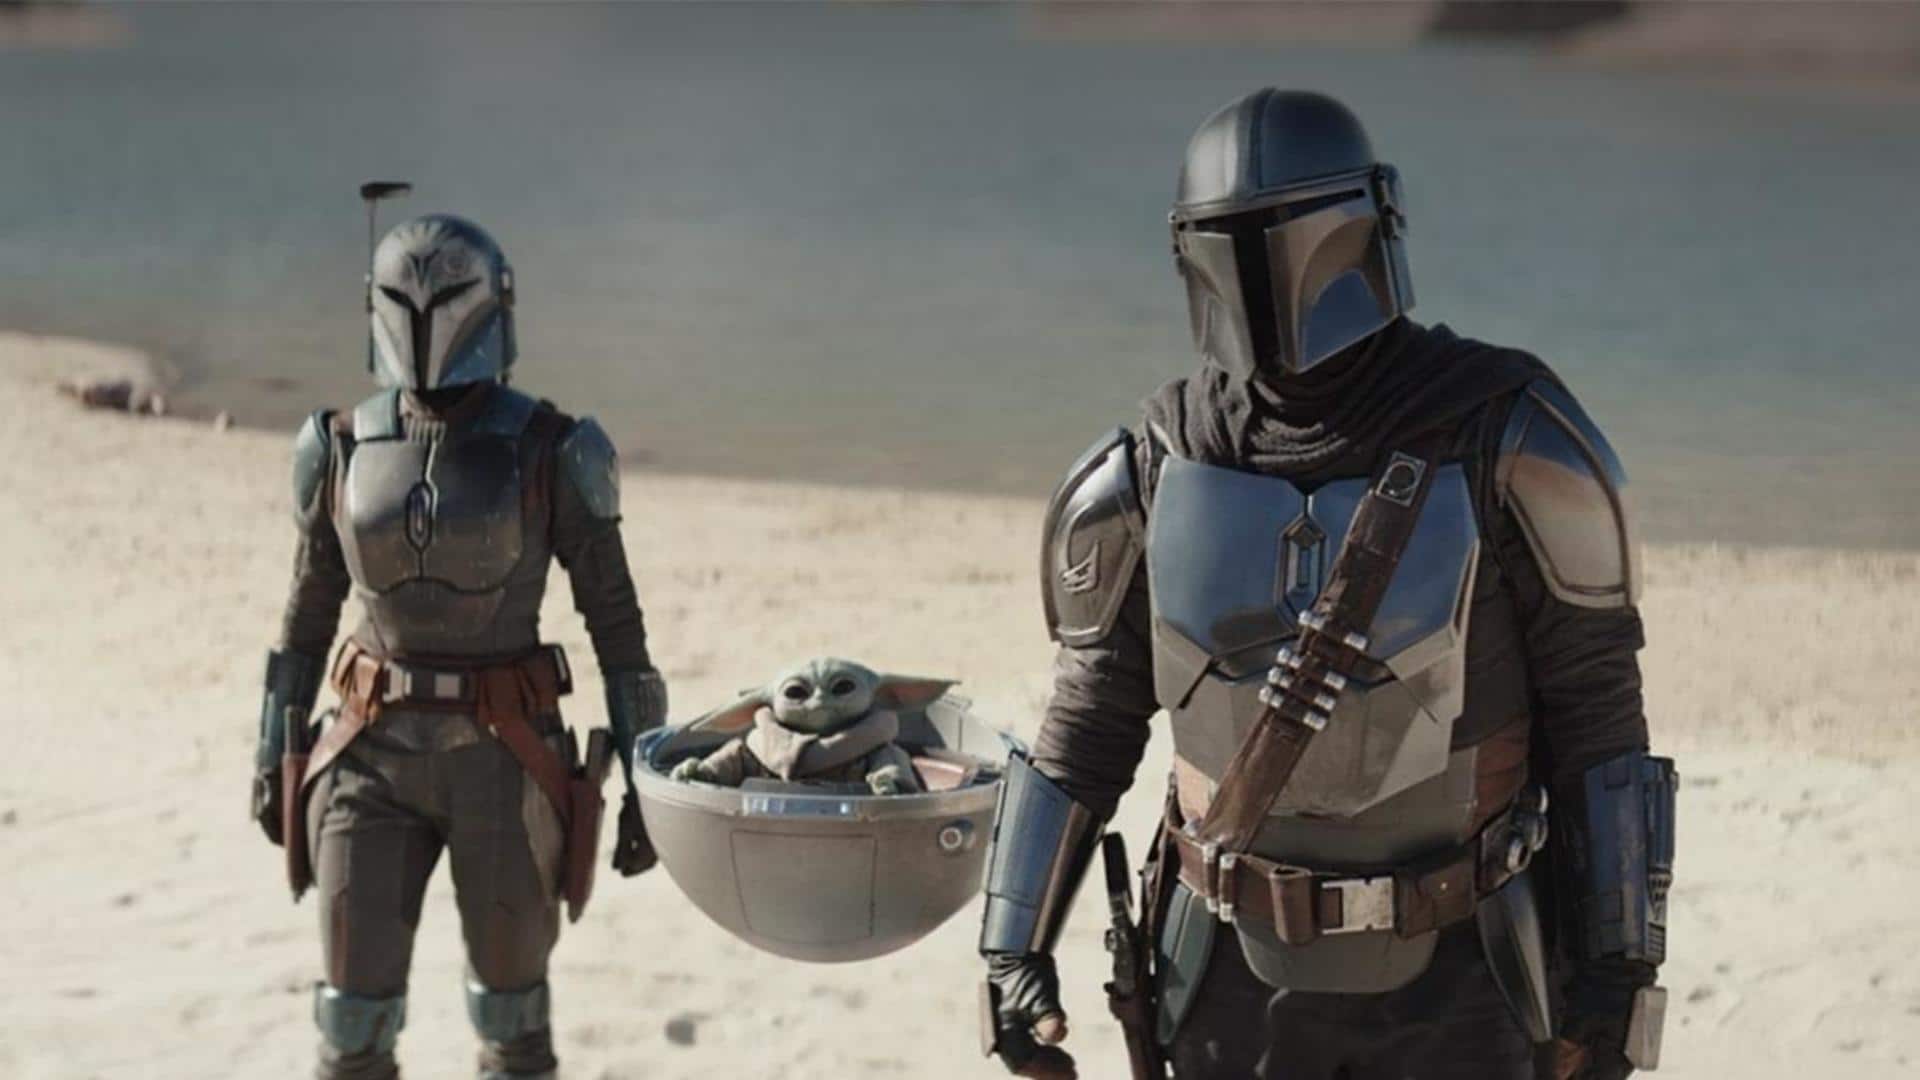 'The Mandalorian' S04 might get delayed due to writers' strike